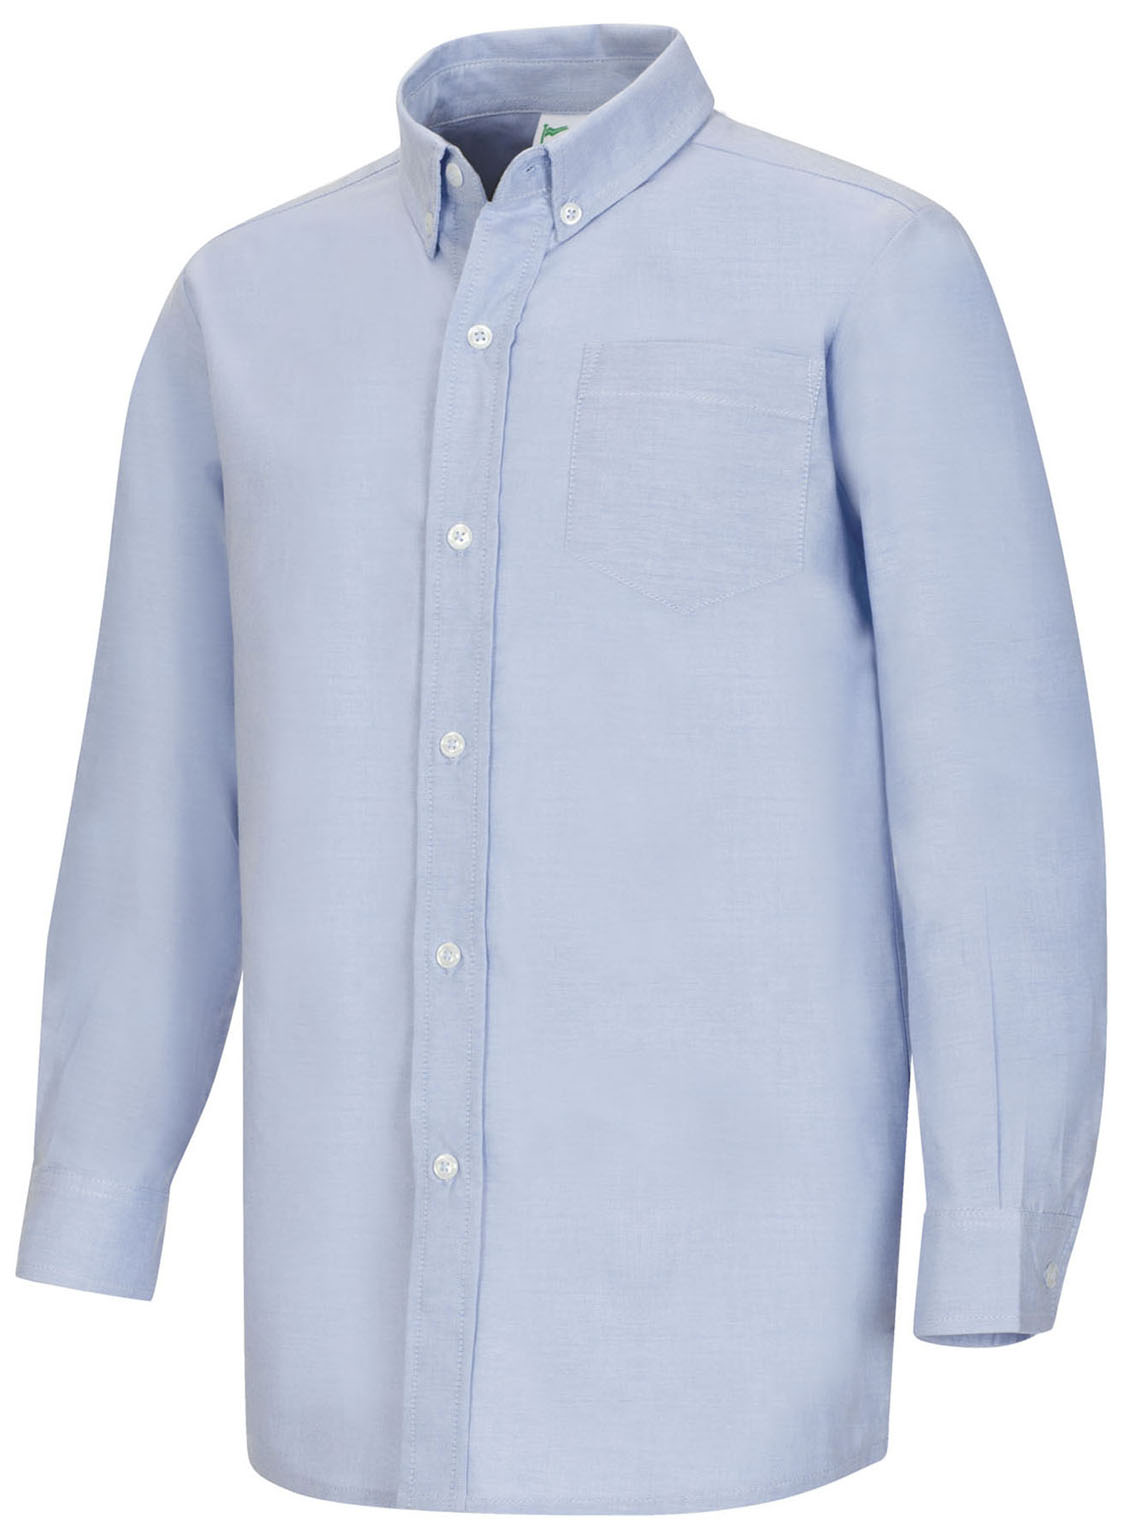 ESA Men's L/S light blue oxford shirt with embroidery